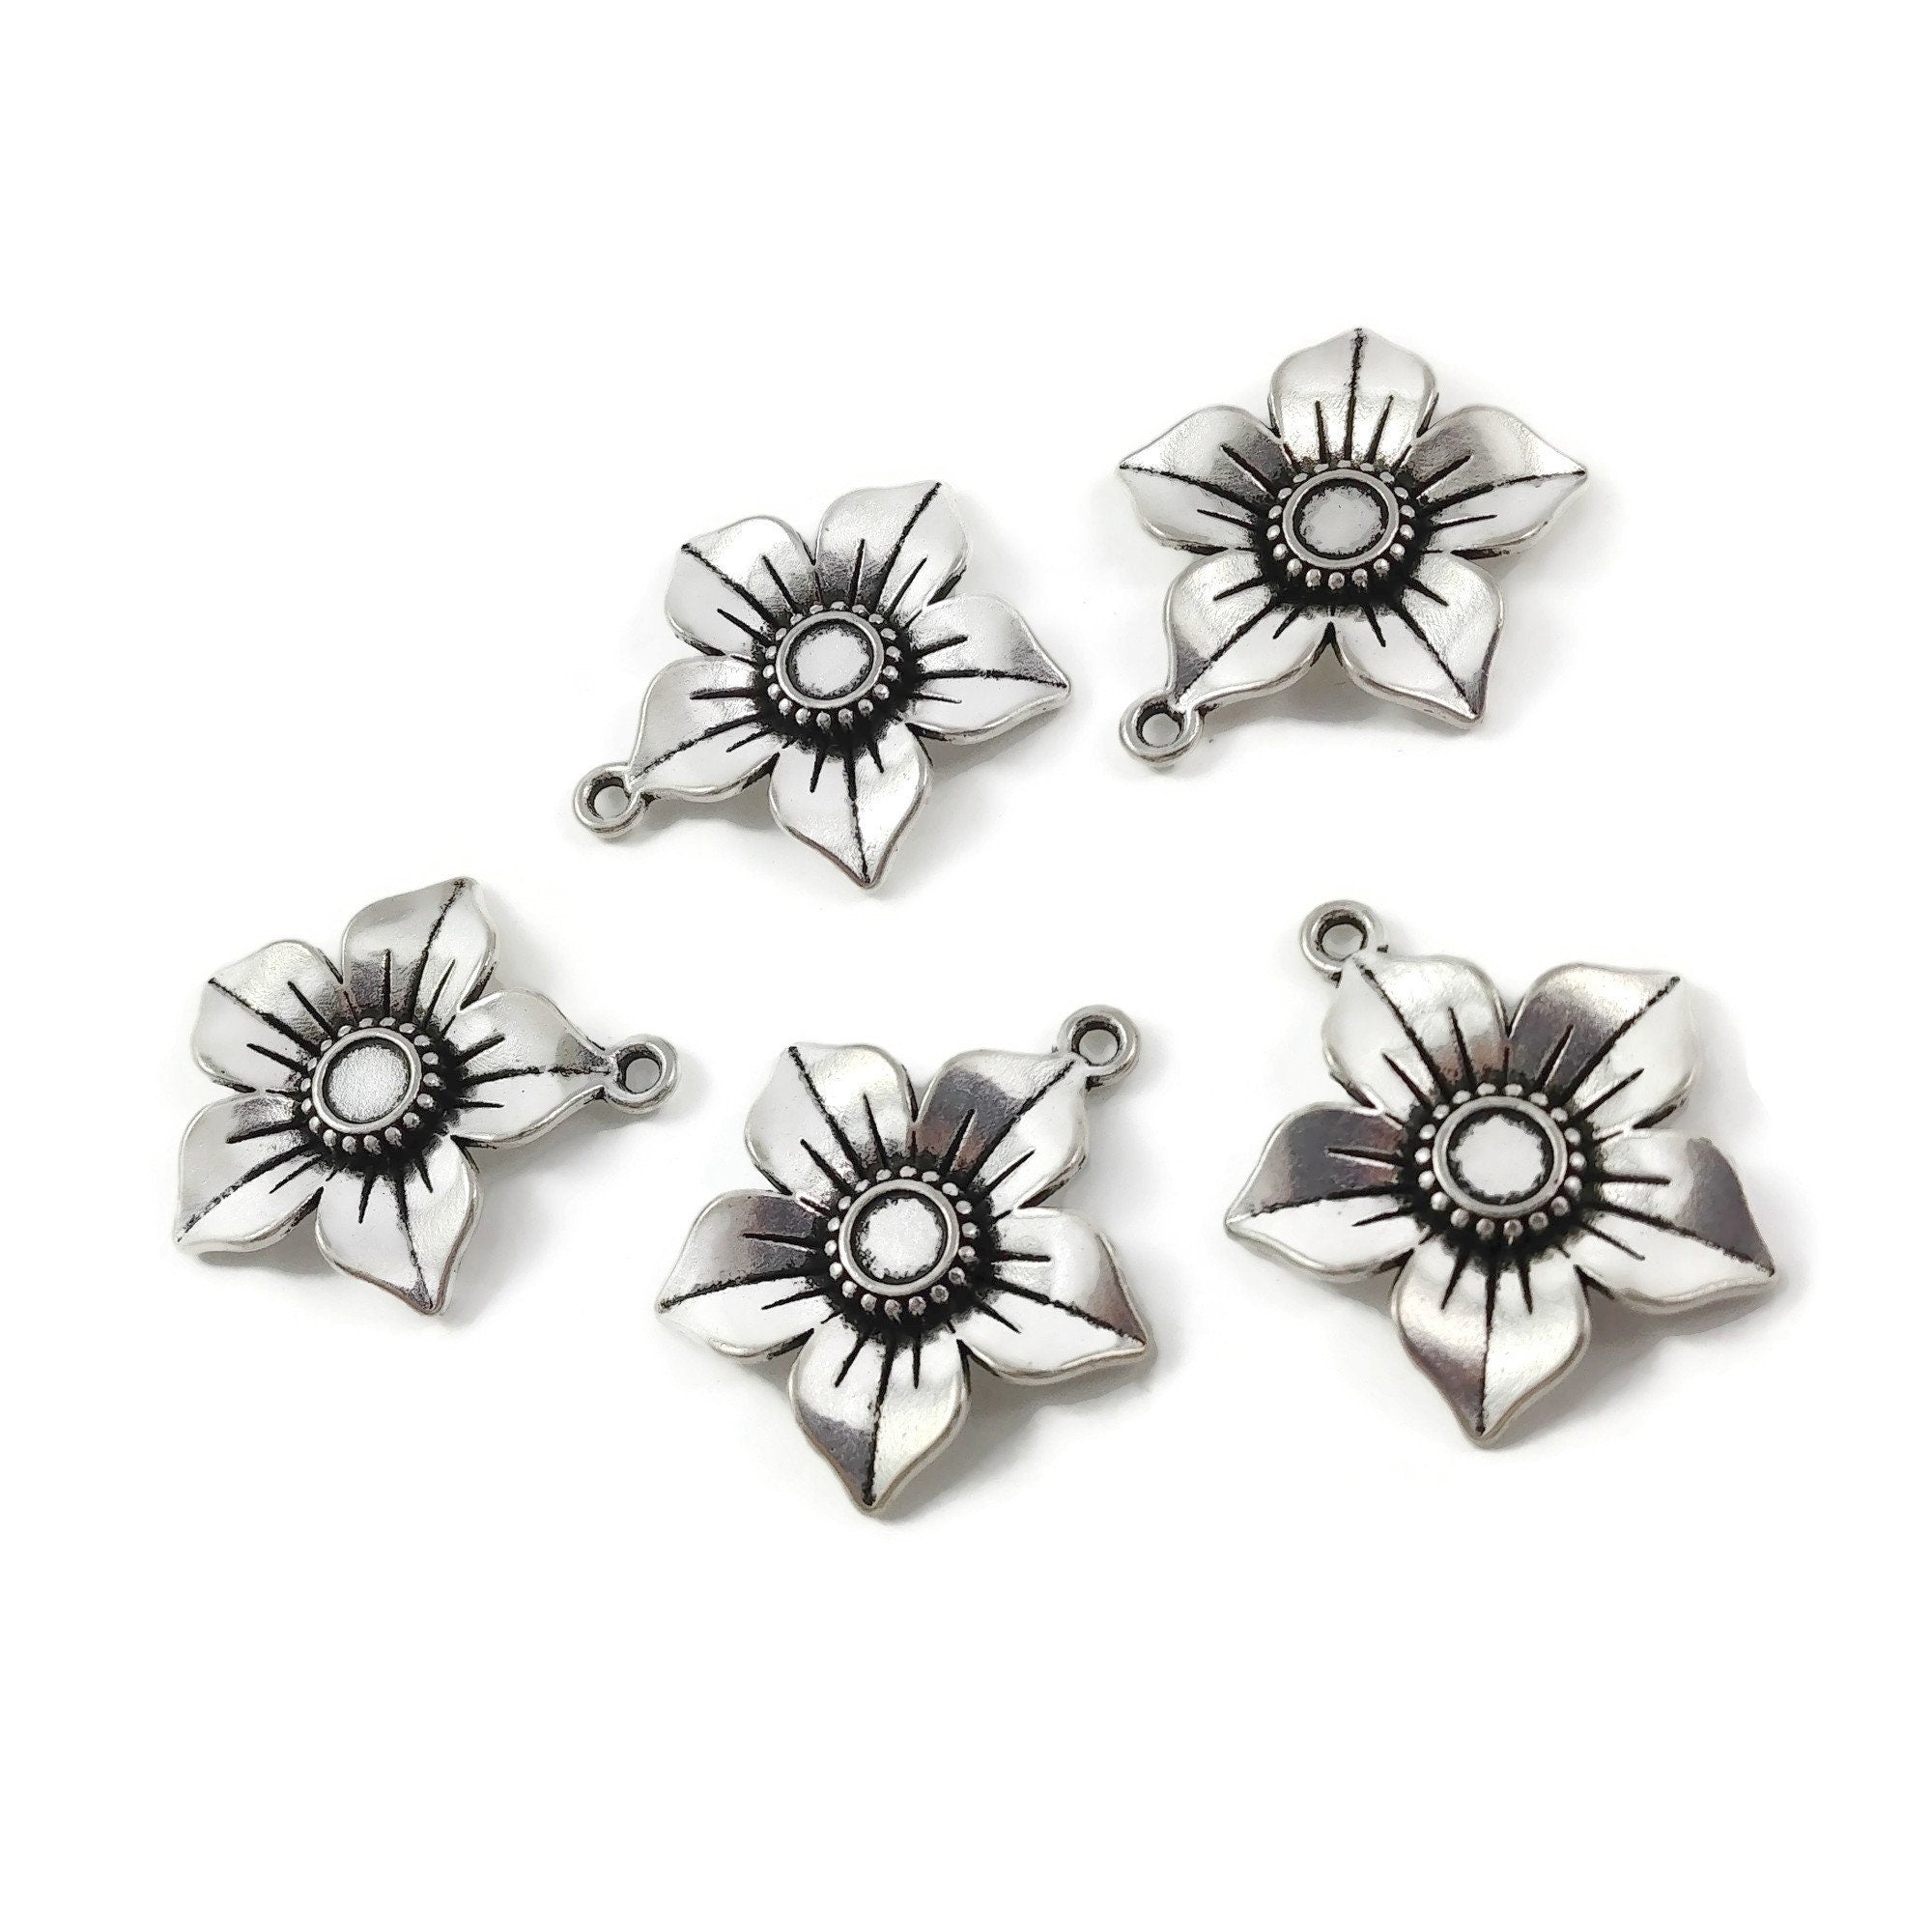 5 flower charms, 27mm nickel free metal pendants, 3D charms for jewelry making